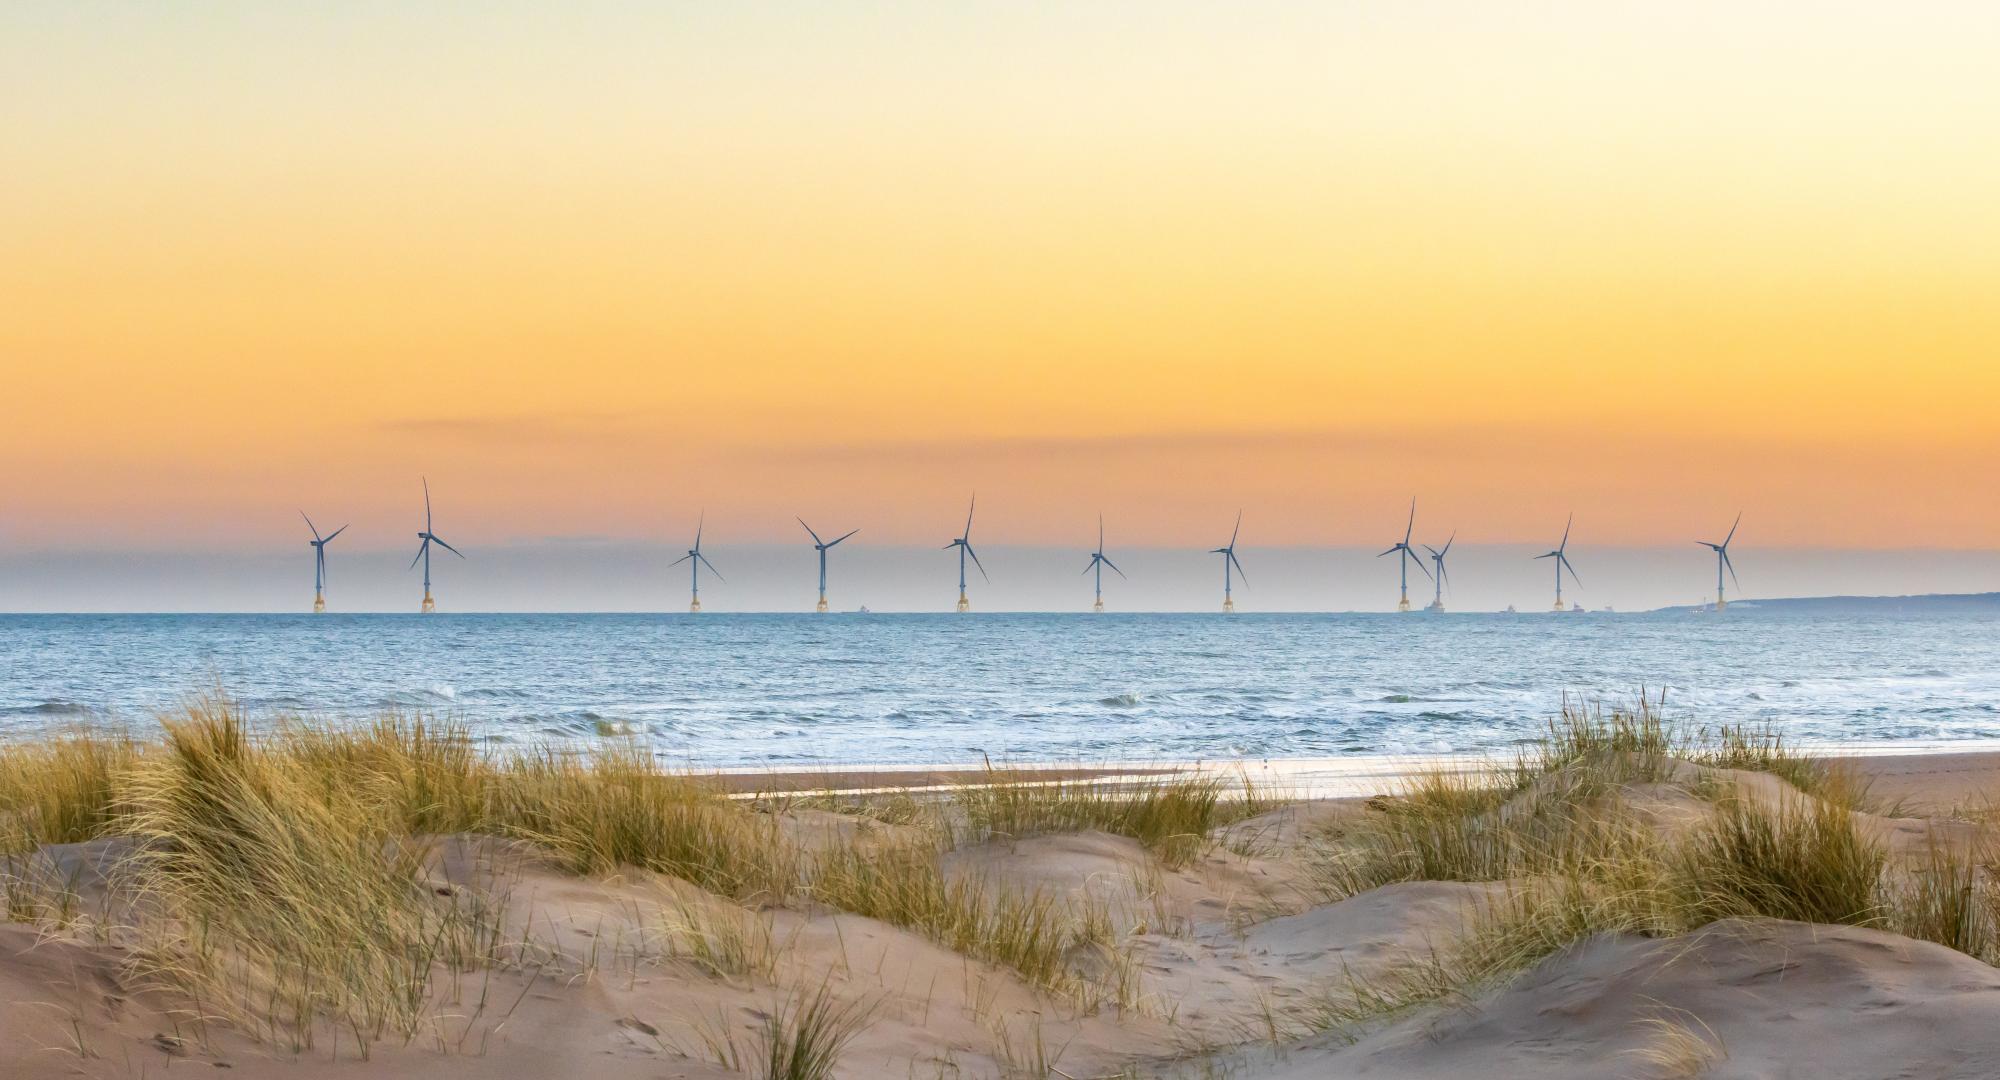 Offshore windfarm with sand dunes in the foreground